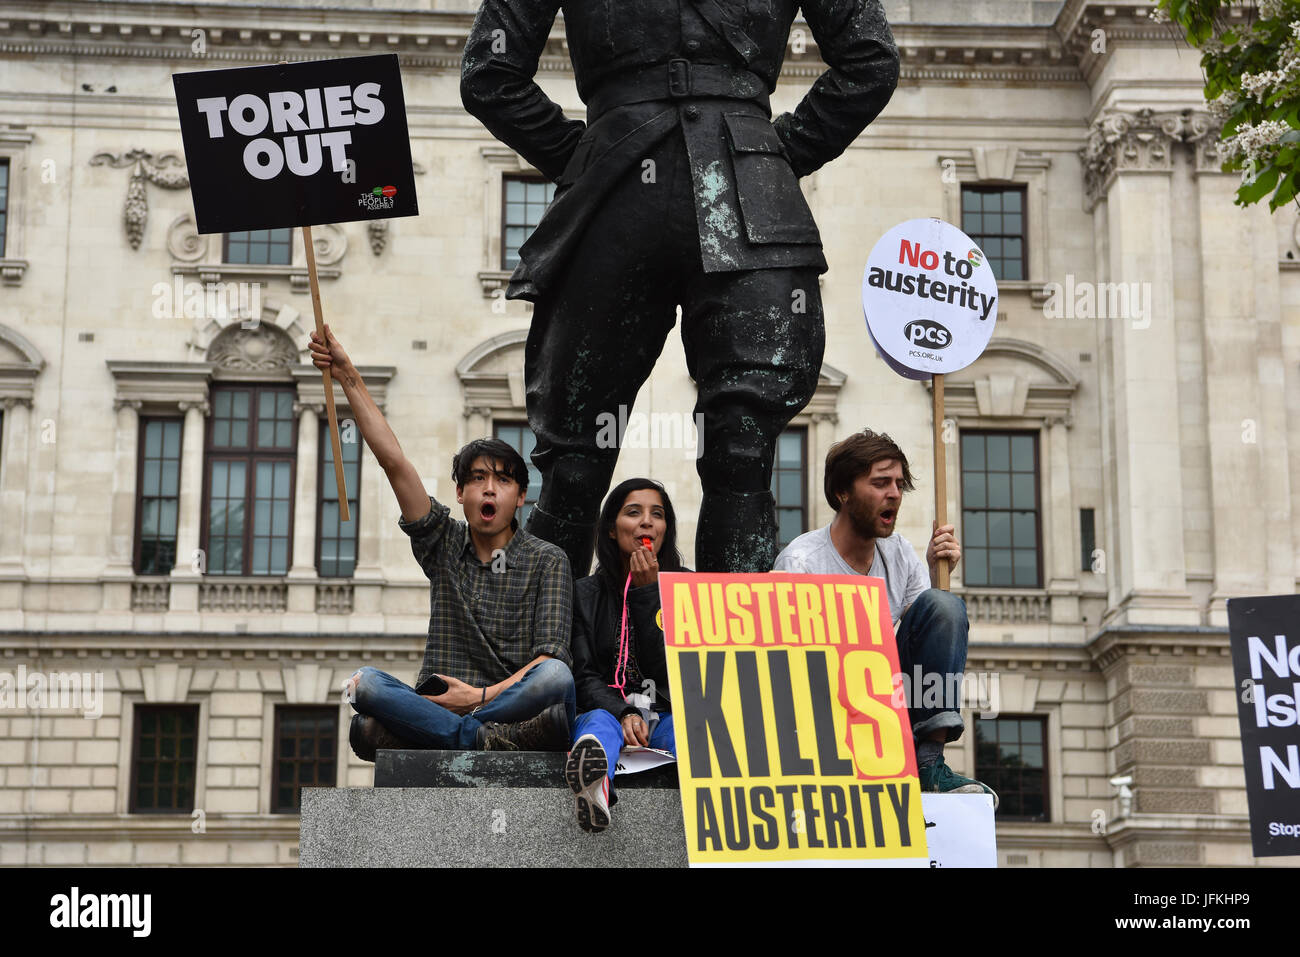 London, UK. 1st Jul, 2017. Protesters in Parliament Square at the 'Not One Day More' protest against the Conservative government. Thousands of protesters marched from Regent Street to Parliament Square, with speechs from Diane Abbott, John McDonnell and Jeremy Corbyn. Credit: Jacob Sacks-Jones/Alamy Live News. Stock Photo